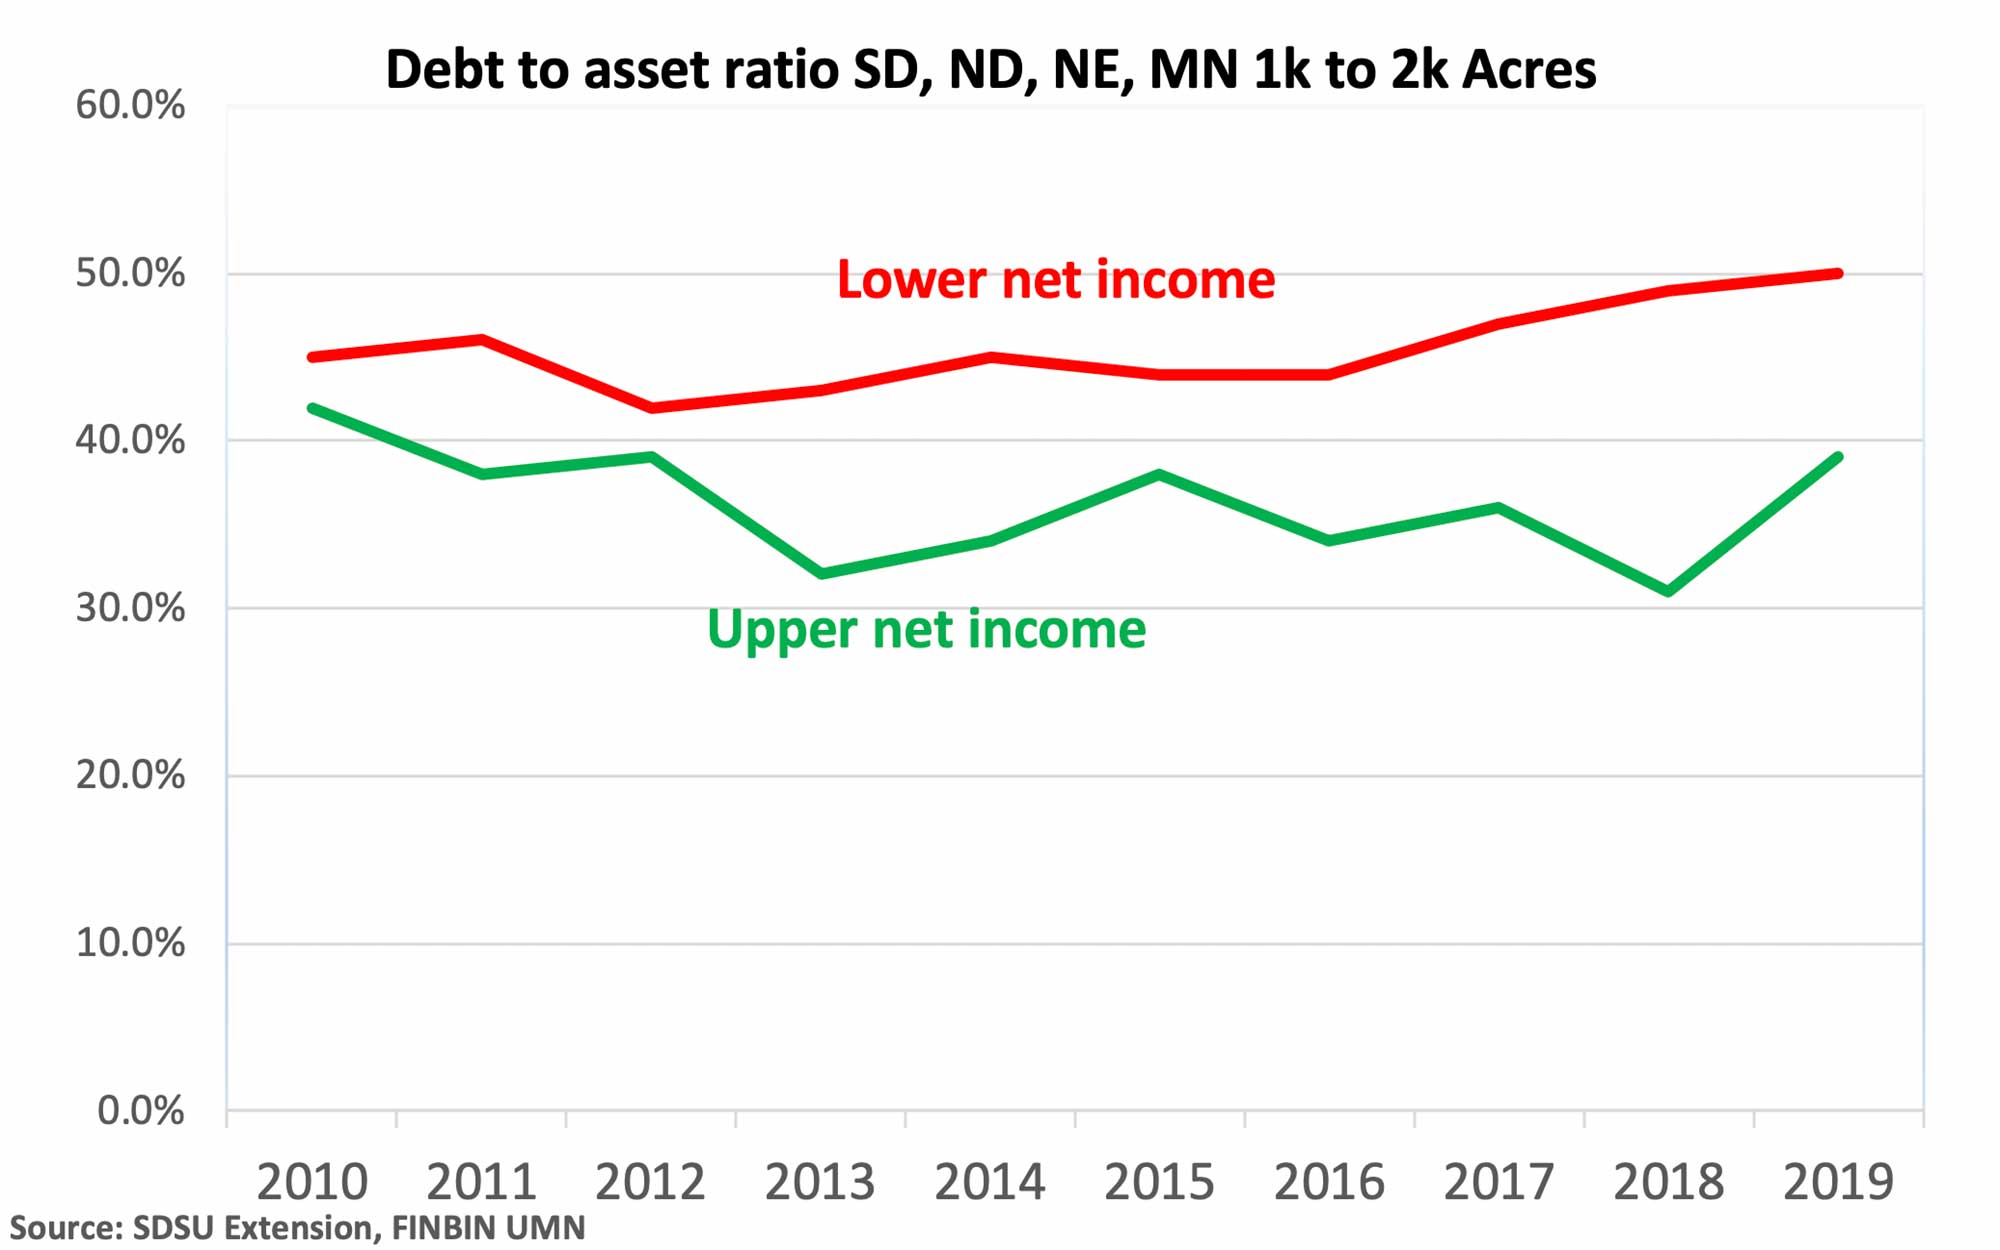 A line graph depicting the debt to asset ratio in SD, ND, NE, and MN. 1-k to 2-k acres. For a complete description, call SDSU Extension at 605-688-6729.